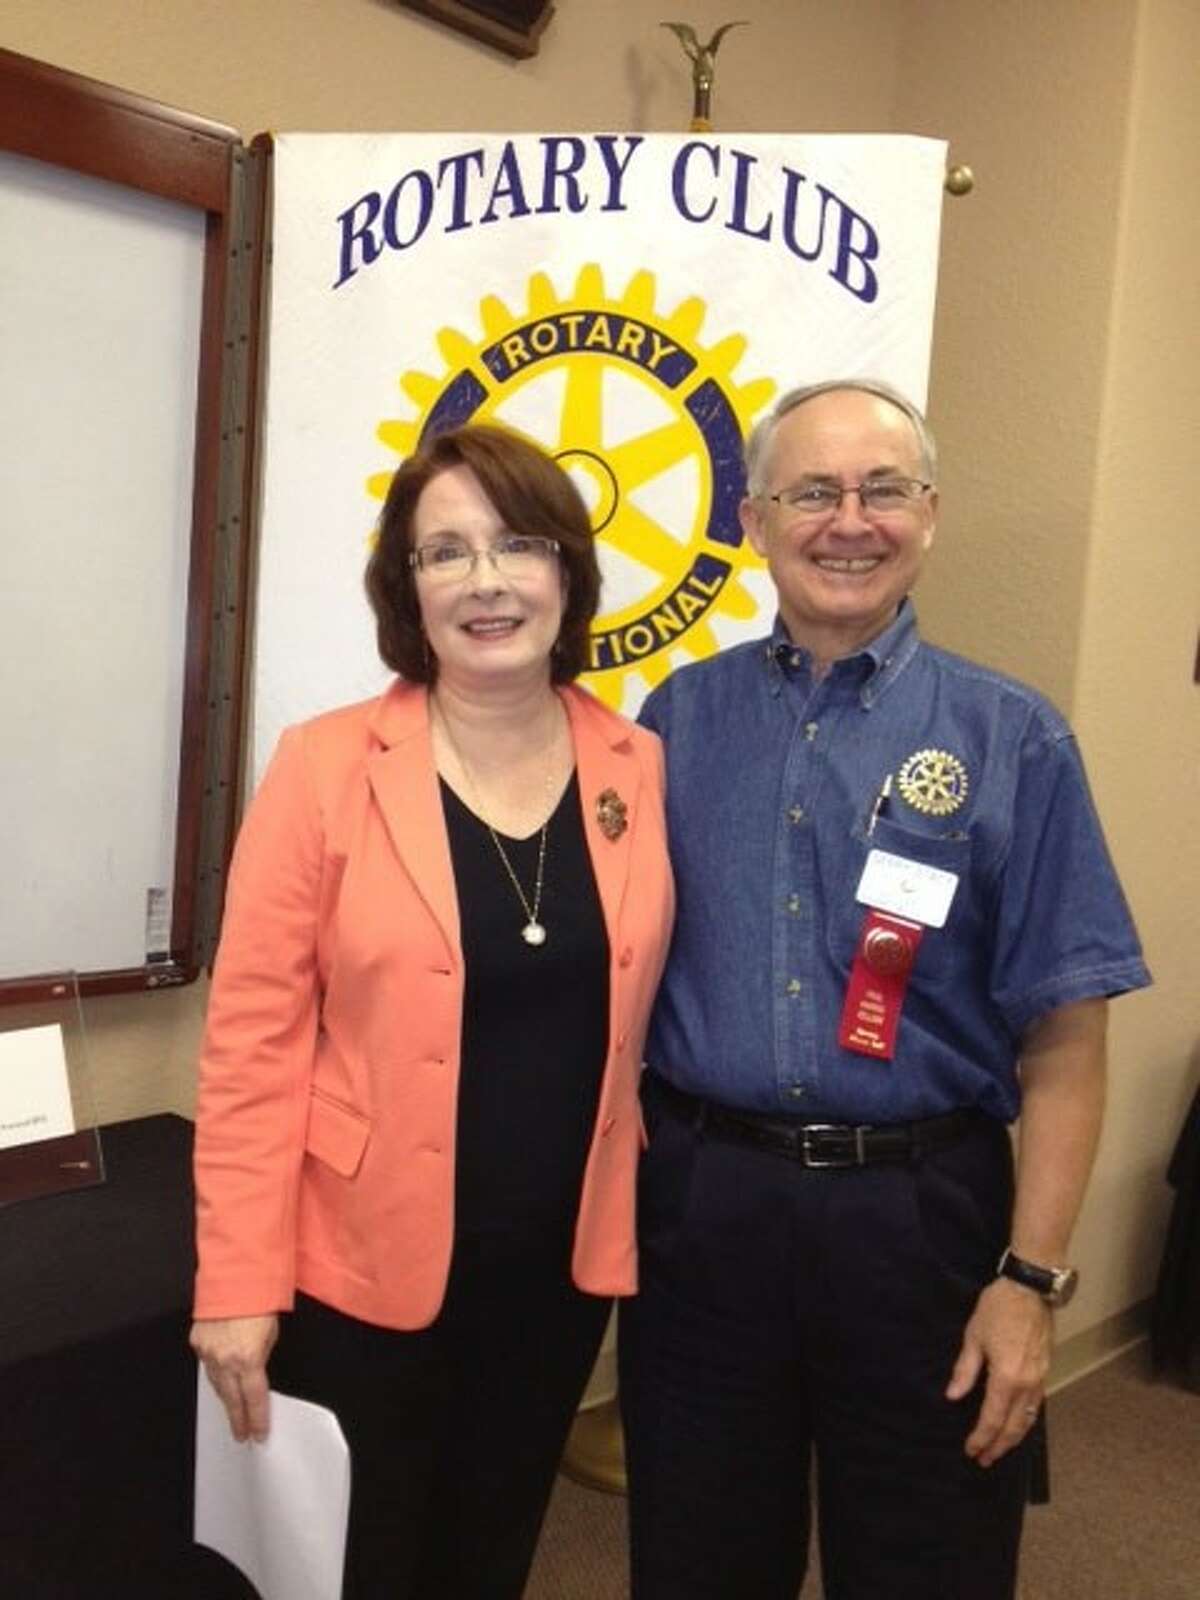 Pictured from left to right are Dr. Loveland and Club President Gerry Stacy.